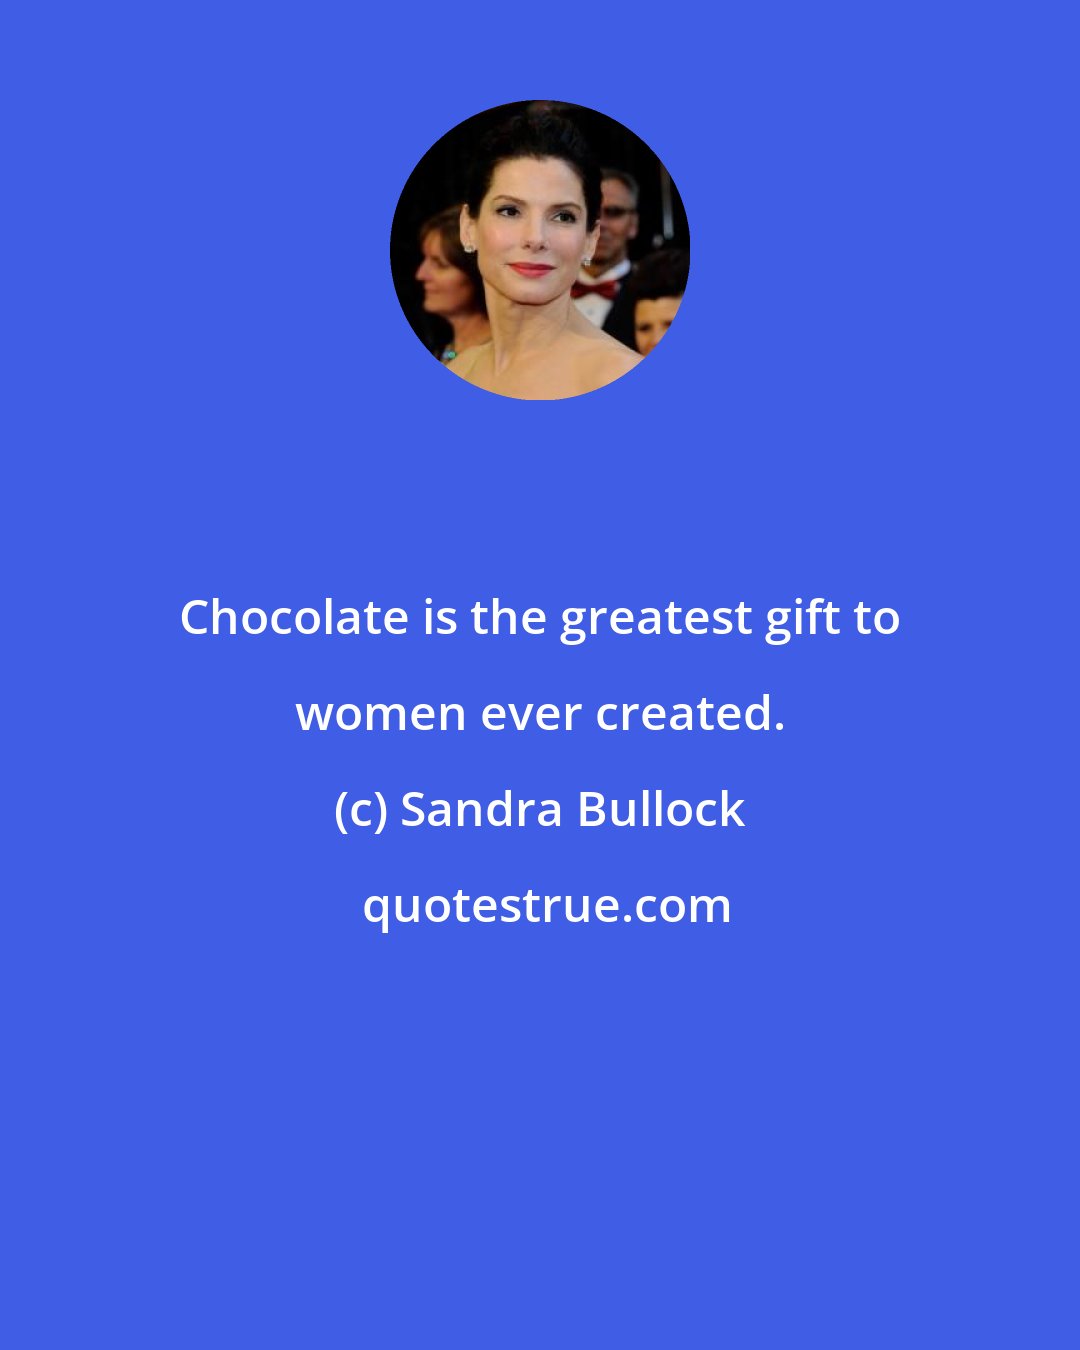 Sandra Bullock: Chocolate is the greatest gift to women ever created.